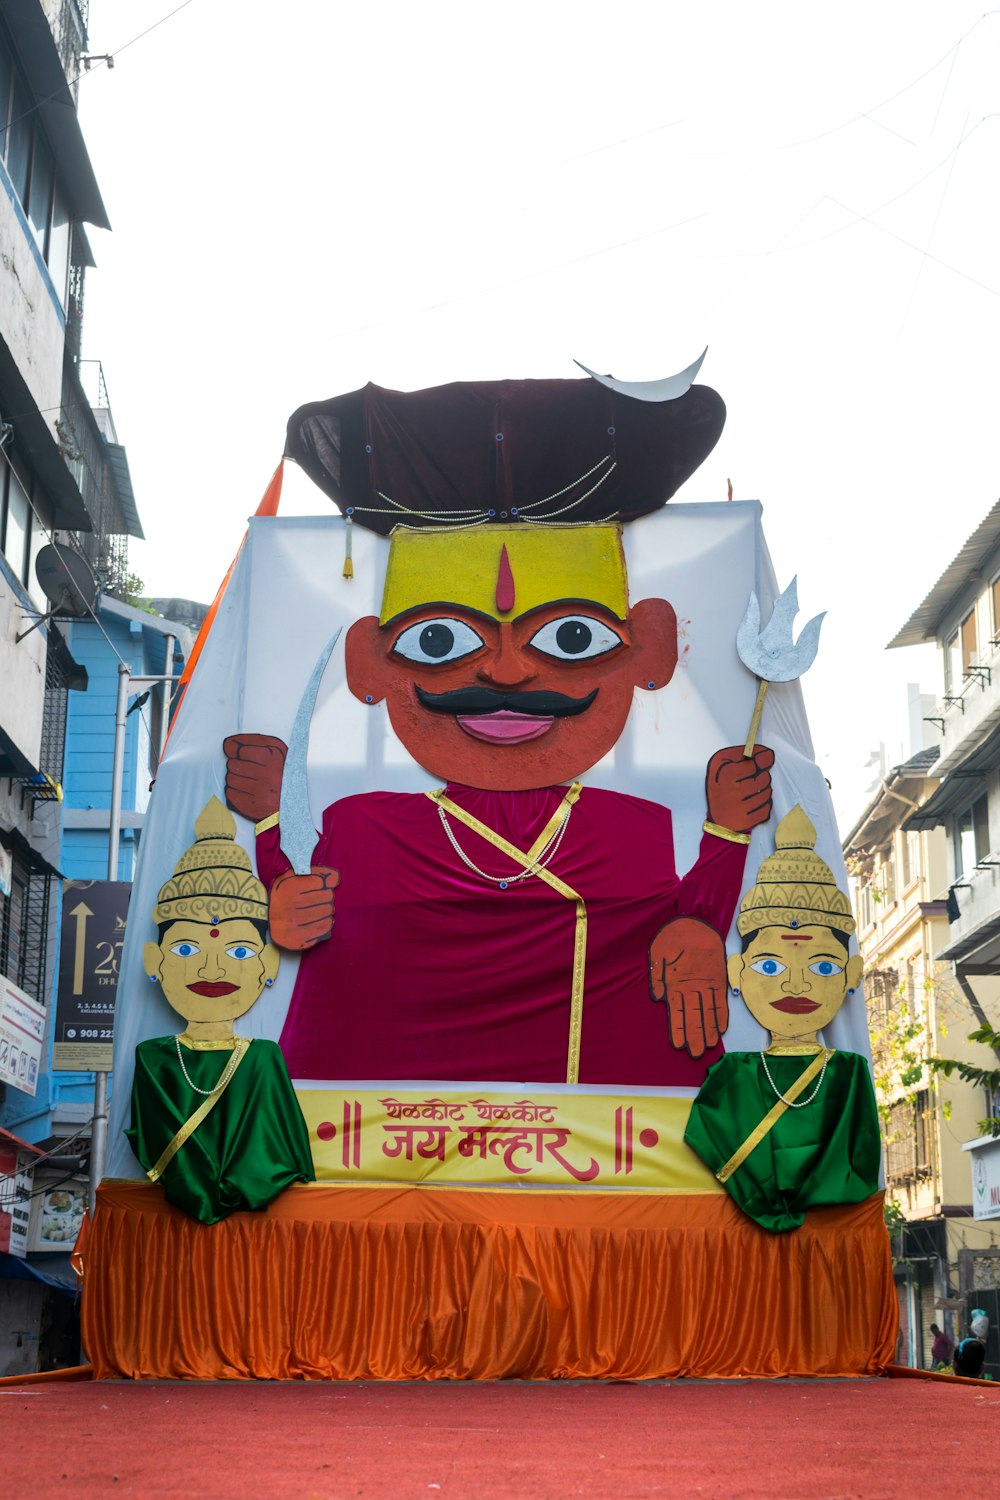 a large float of a man with a mustache